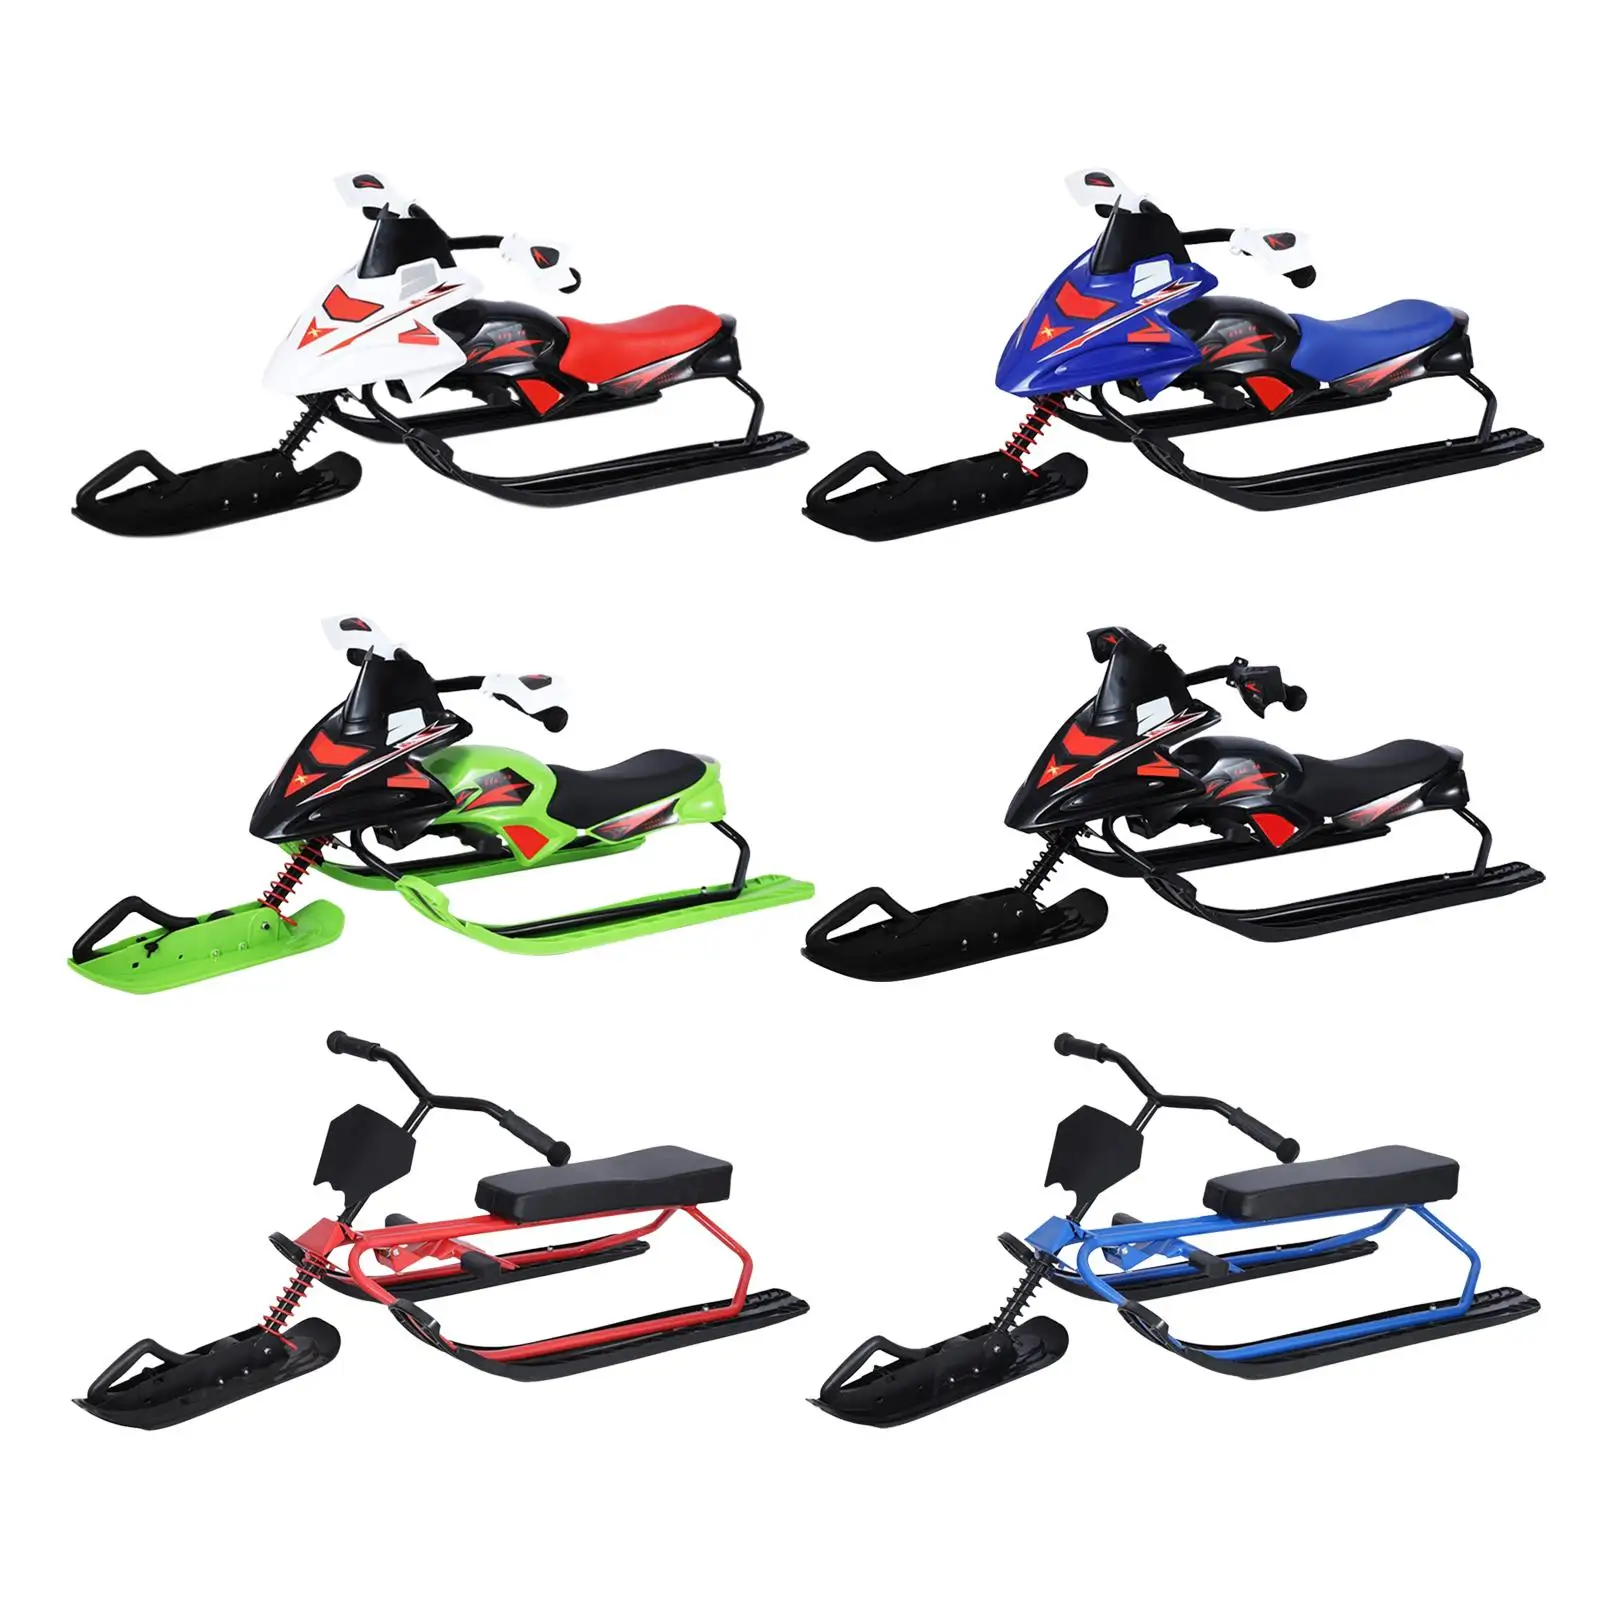 Snow Racer with Steering Wheel Brakes Ski Sled Sleigh for Outdoor Activities